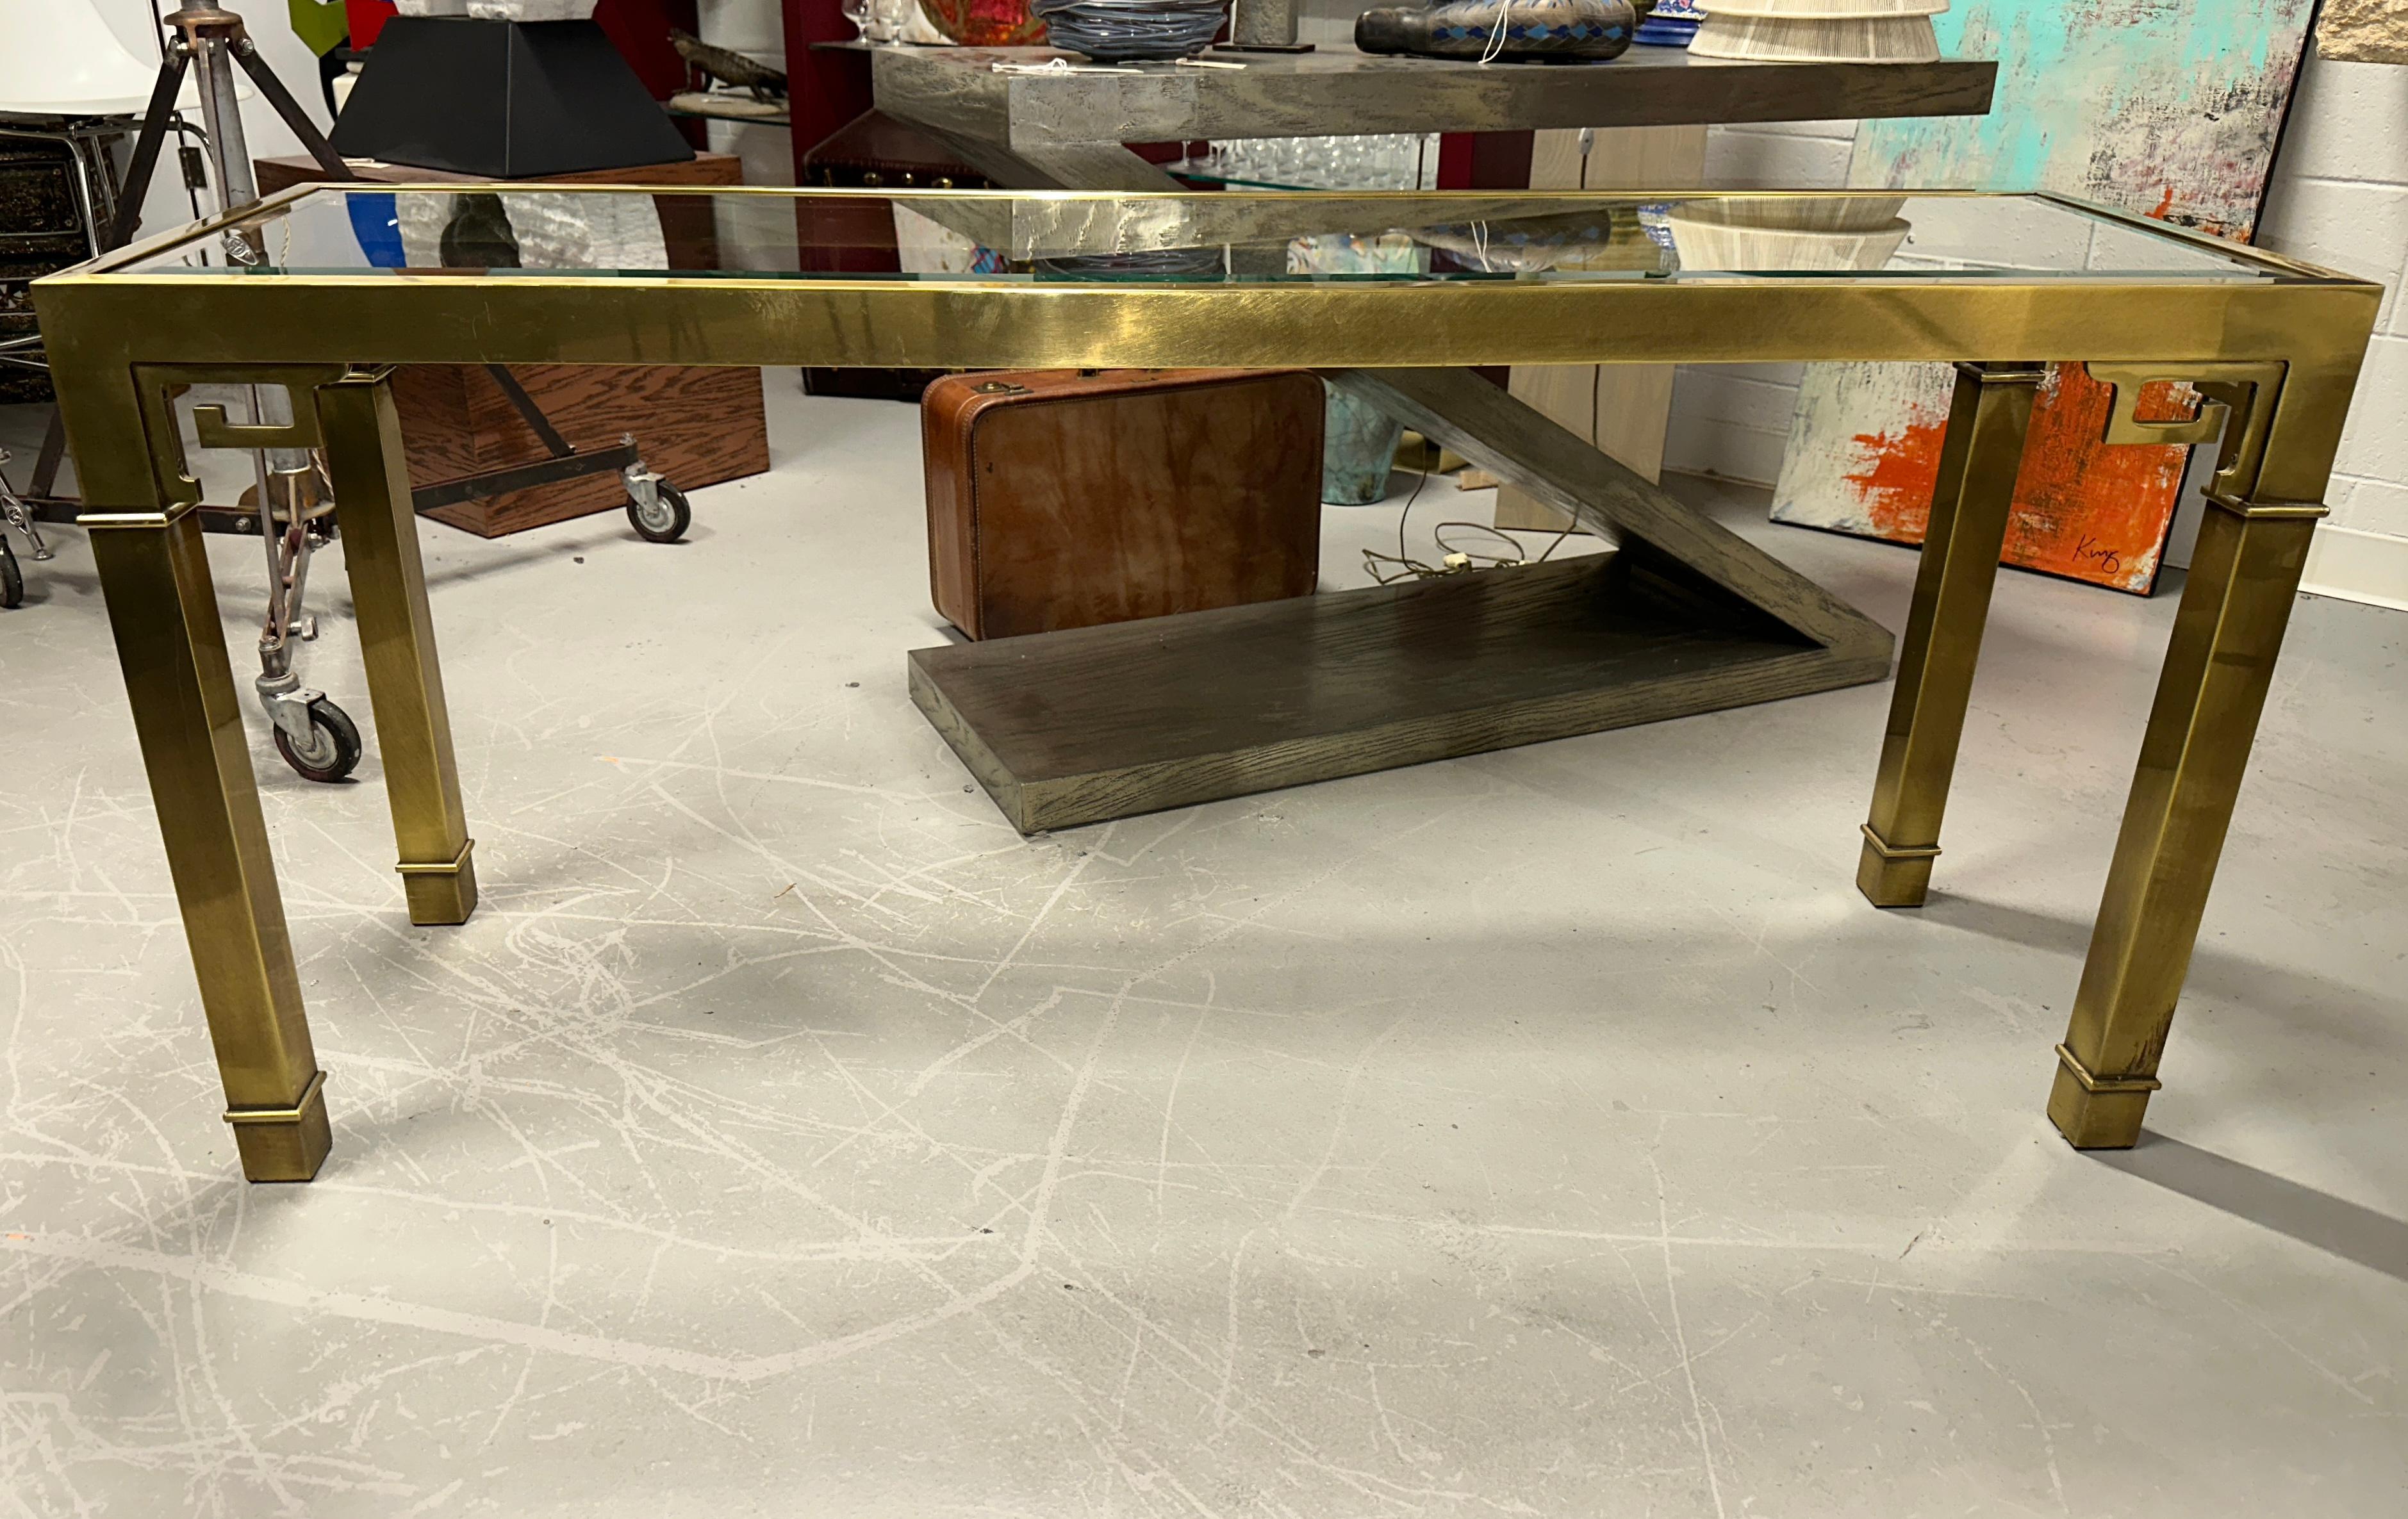 Nice greek key motif brass console or sofa table by Mastercraft. The glass top is bevelled. The table is in good vintage condition, but does have some scratches and surface imperfections detailed in the pictures. There is a flaw in one corner of the